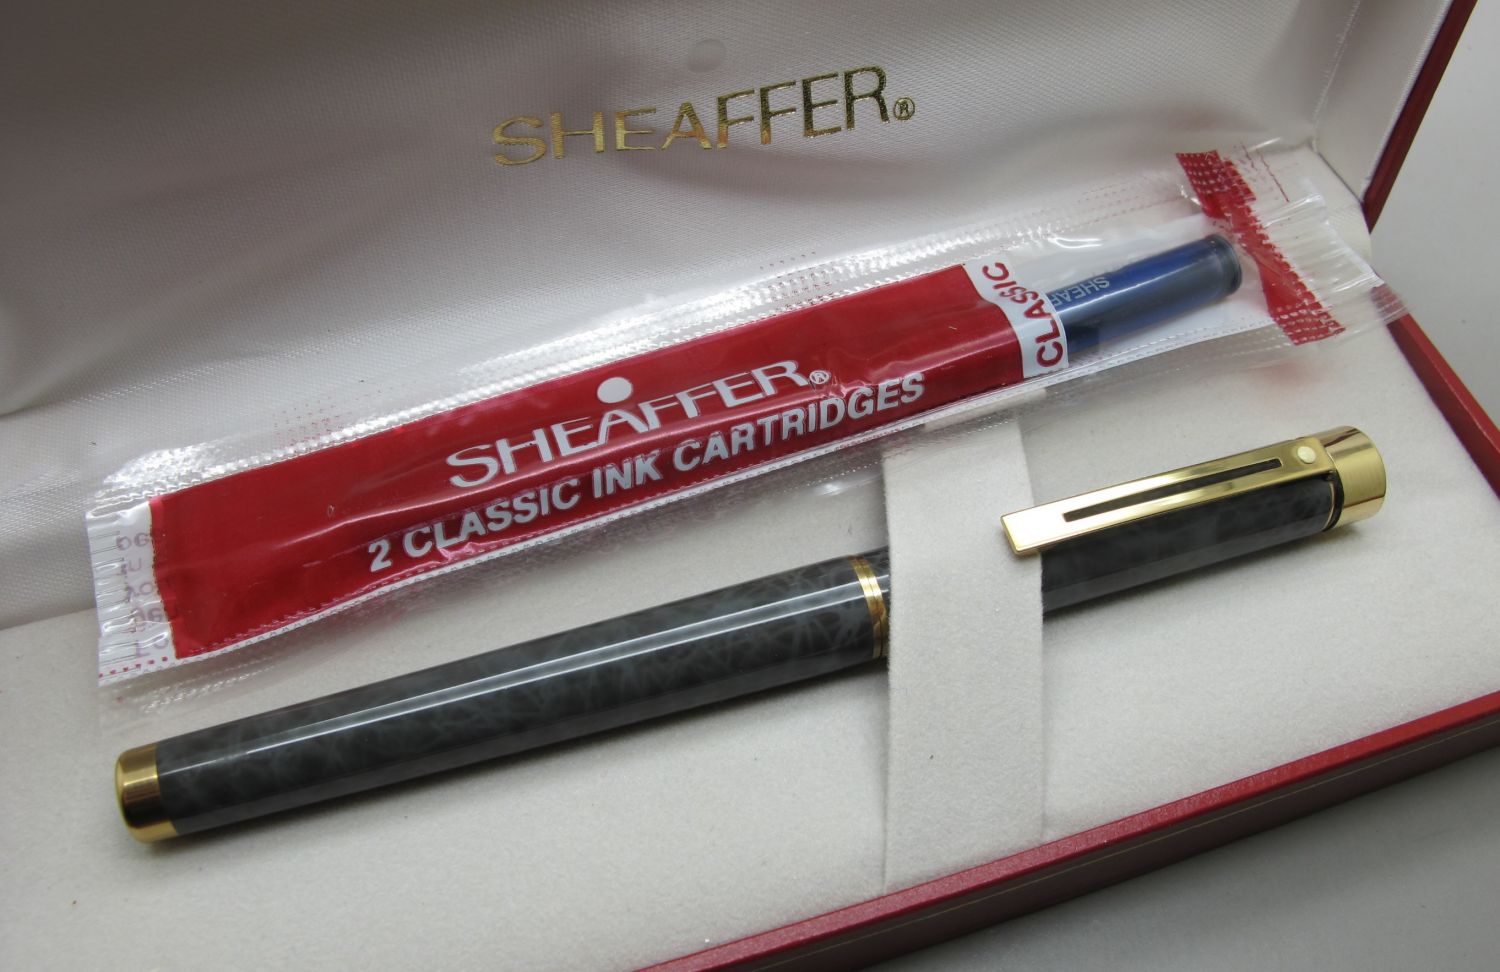 Sheaffer Marble Grey Ronce